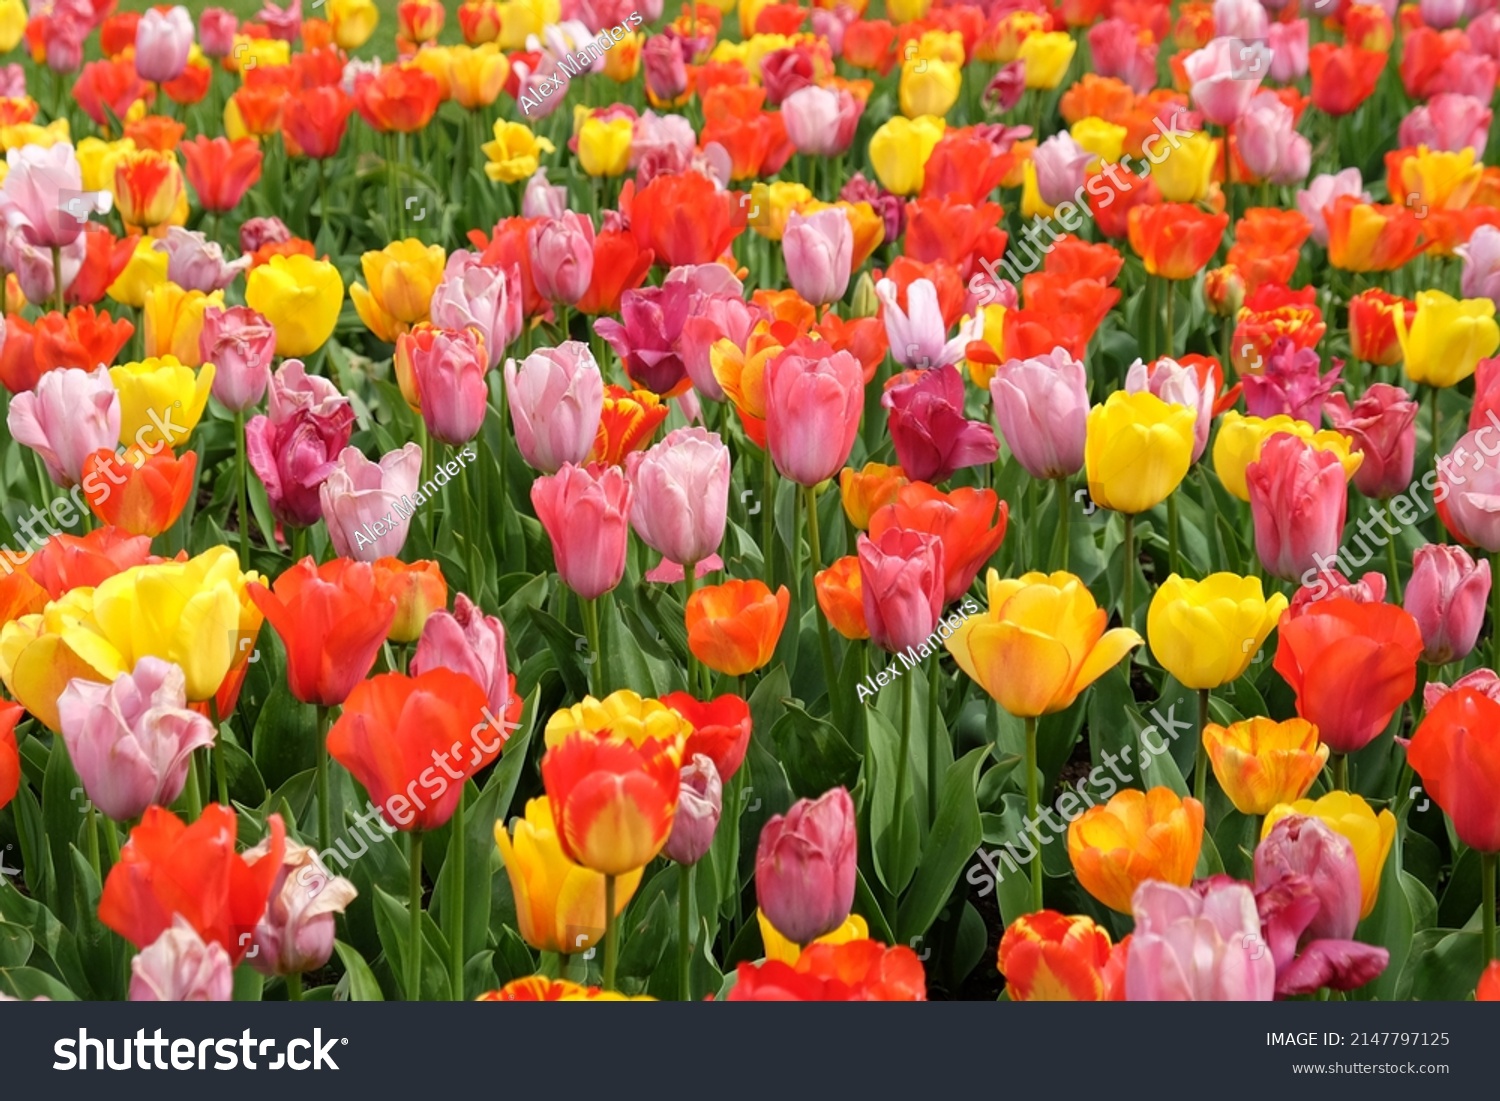 A colourful mix of hybrid triumph tulips in flower.  #2147797125